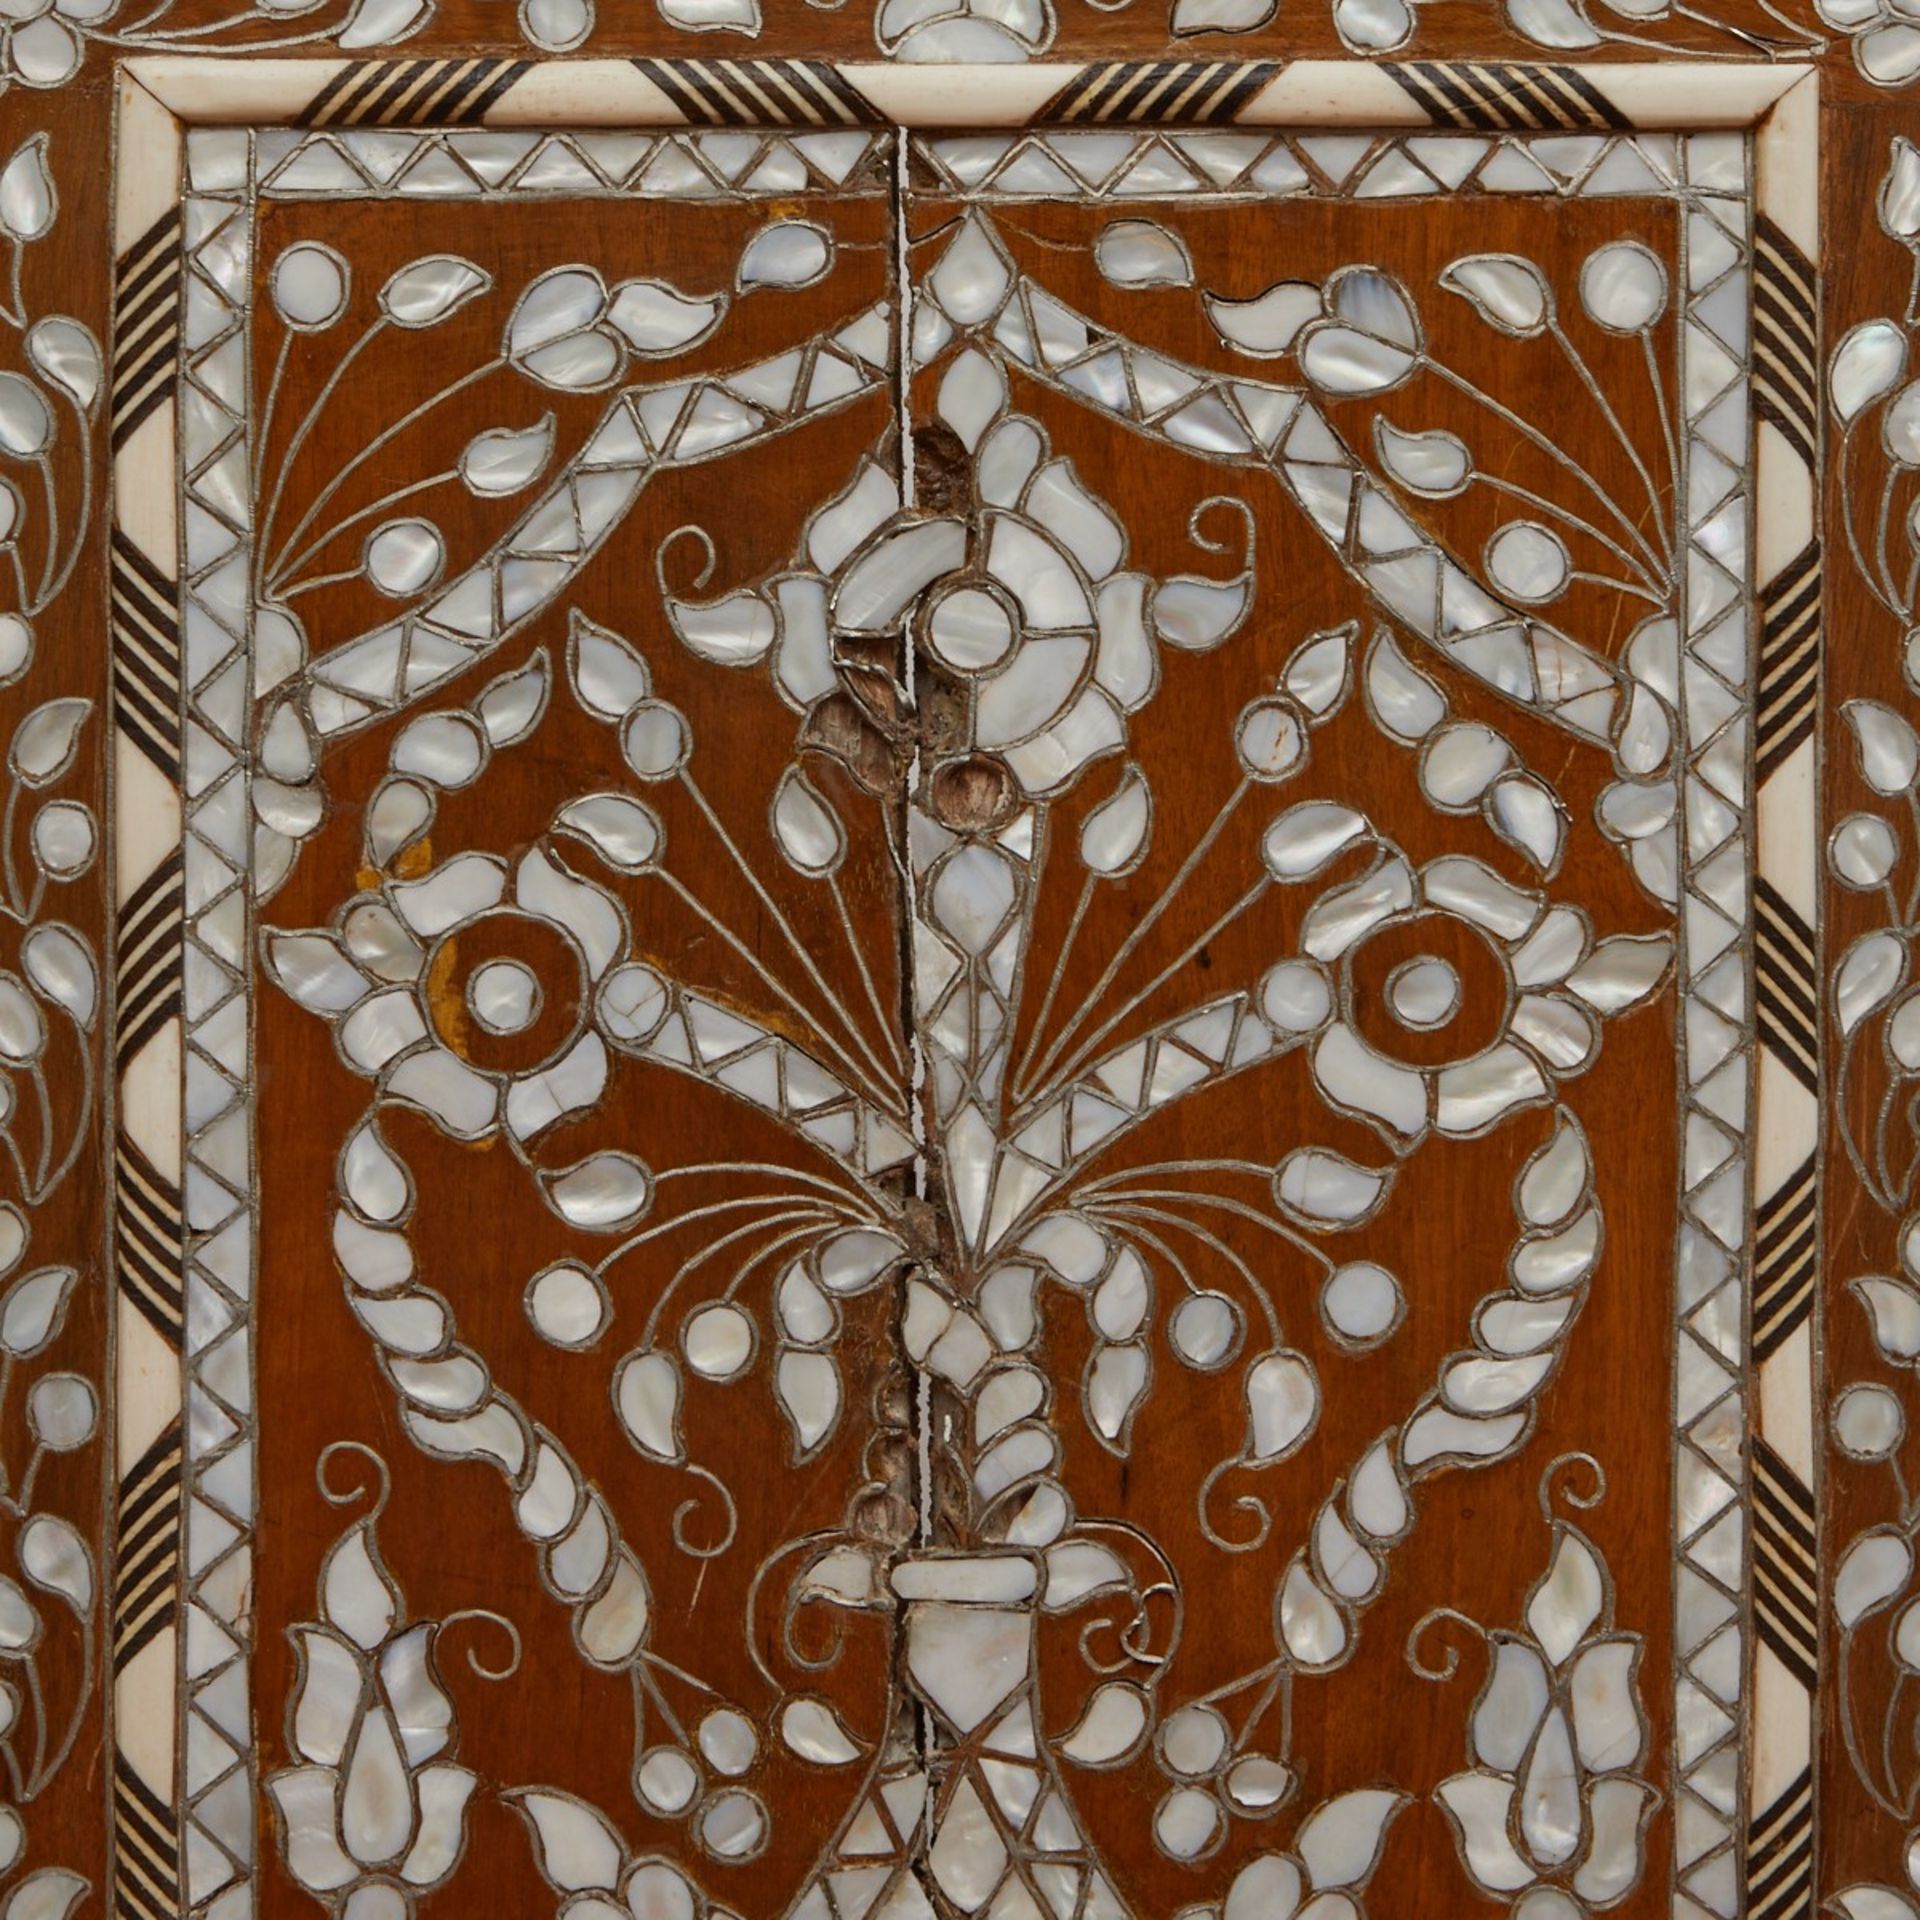 Pair of Syrian Mother of Pearl Inlaid Armchairs - Image 6 of 7